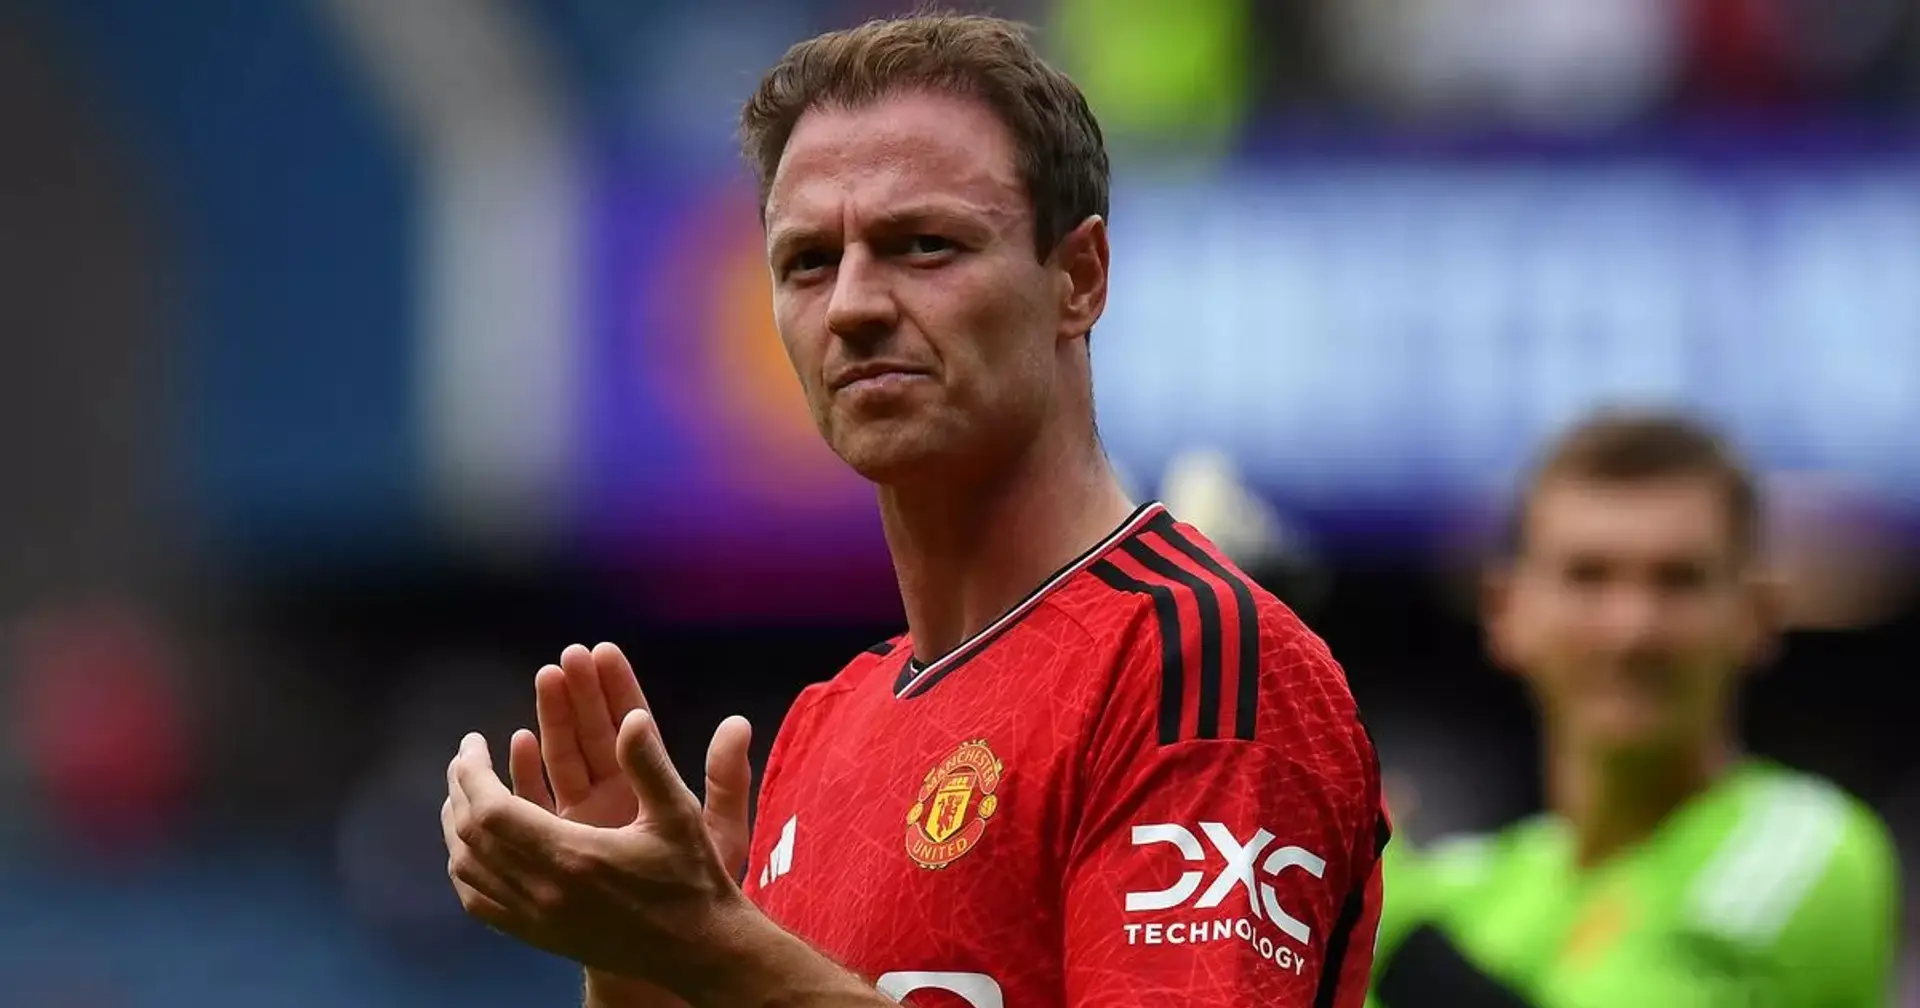 'Player of the Season': Jonny Evans continues to impress Man United fans